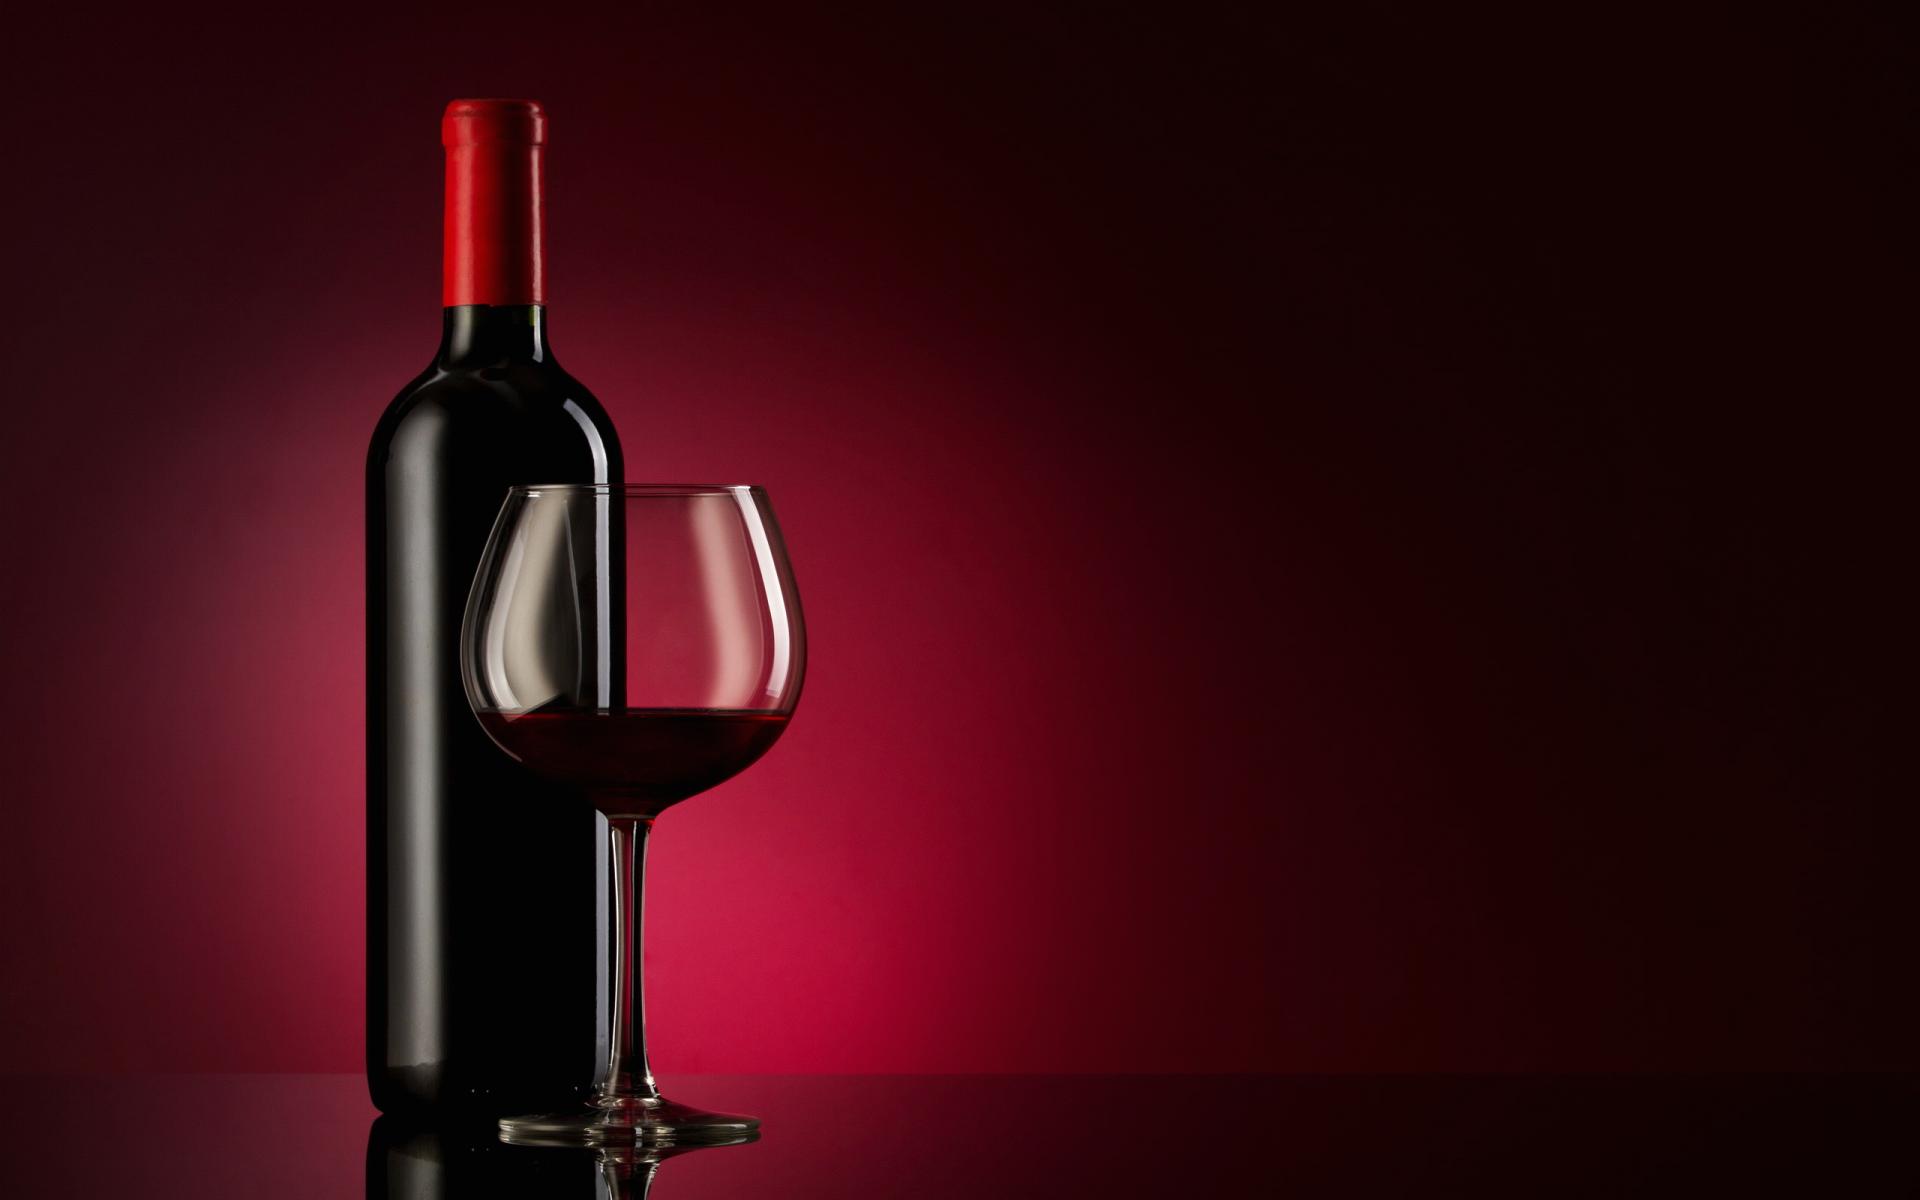 Wallpaper Red Wine Bottle And Glass - 1920 x 1200 - Food Drinks